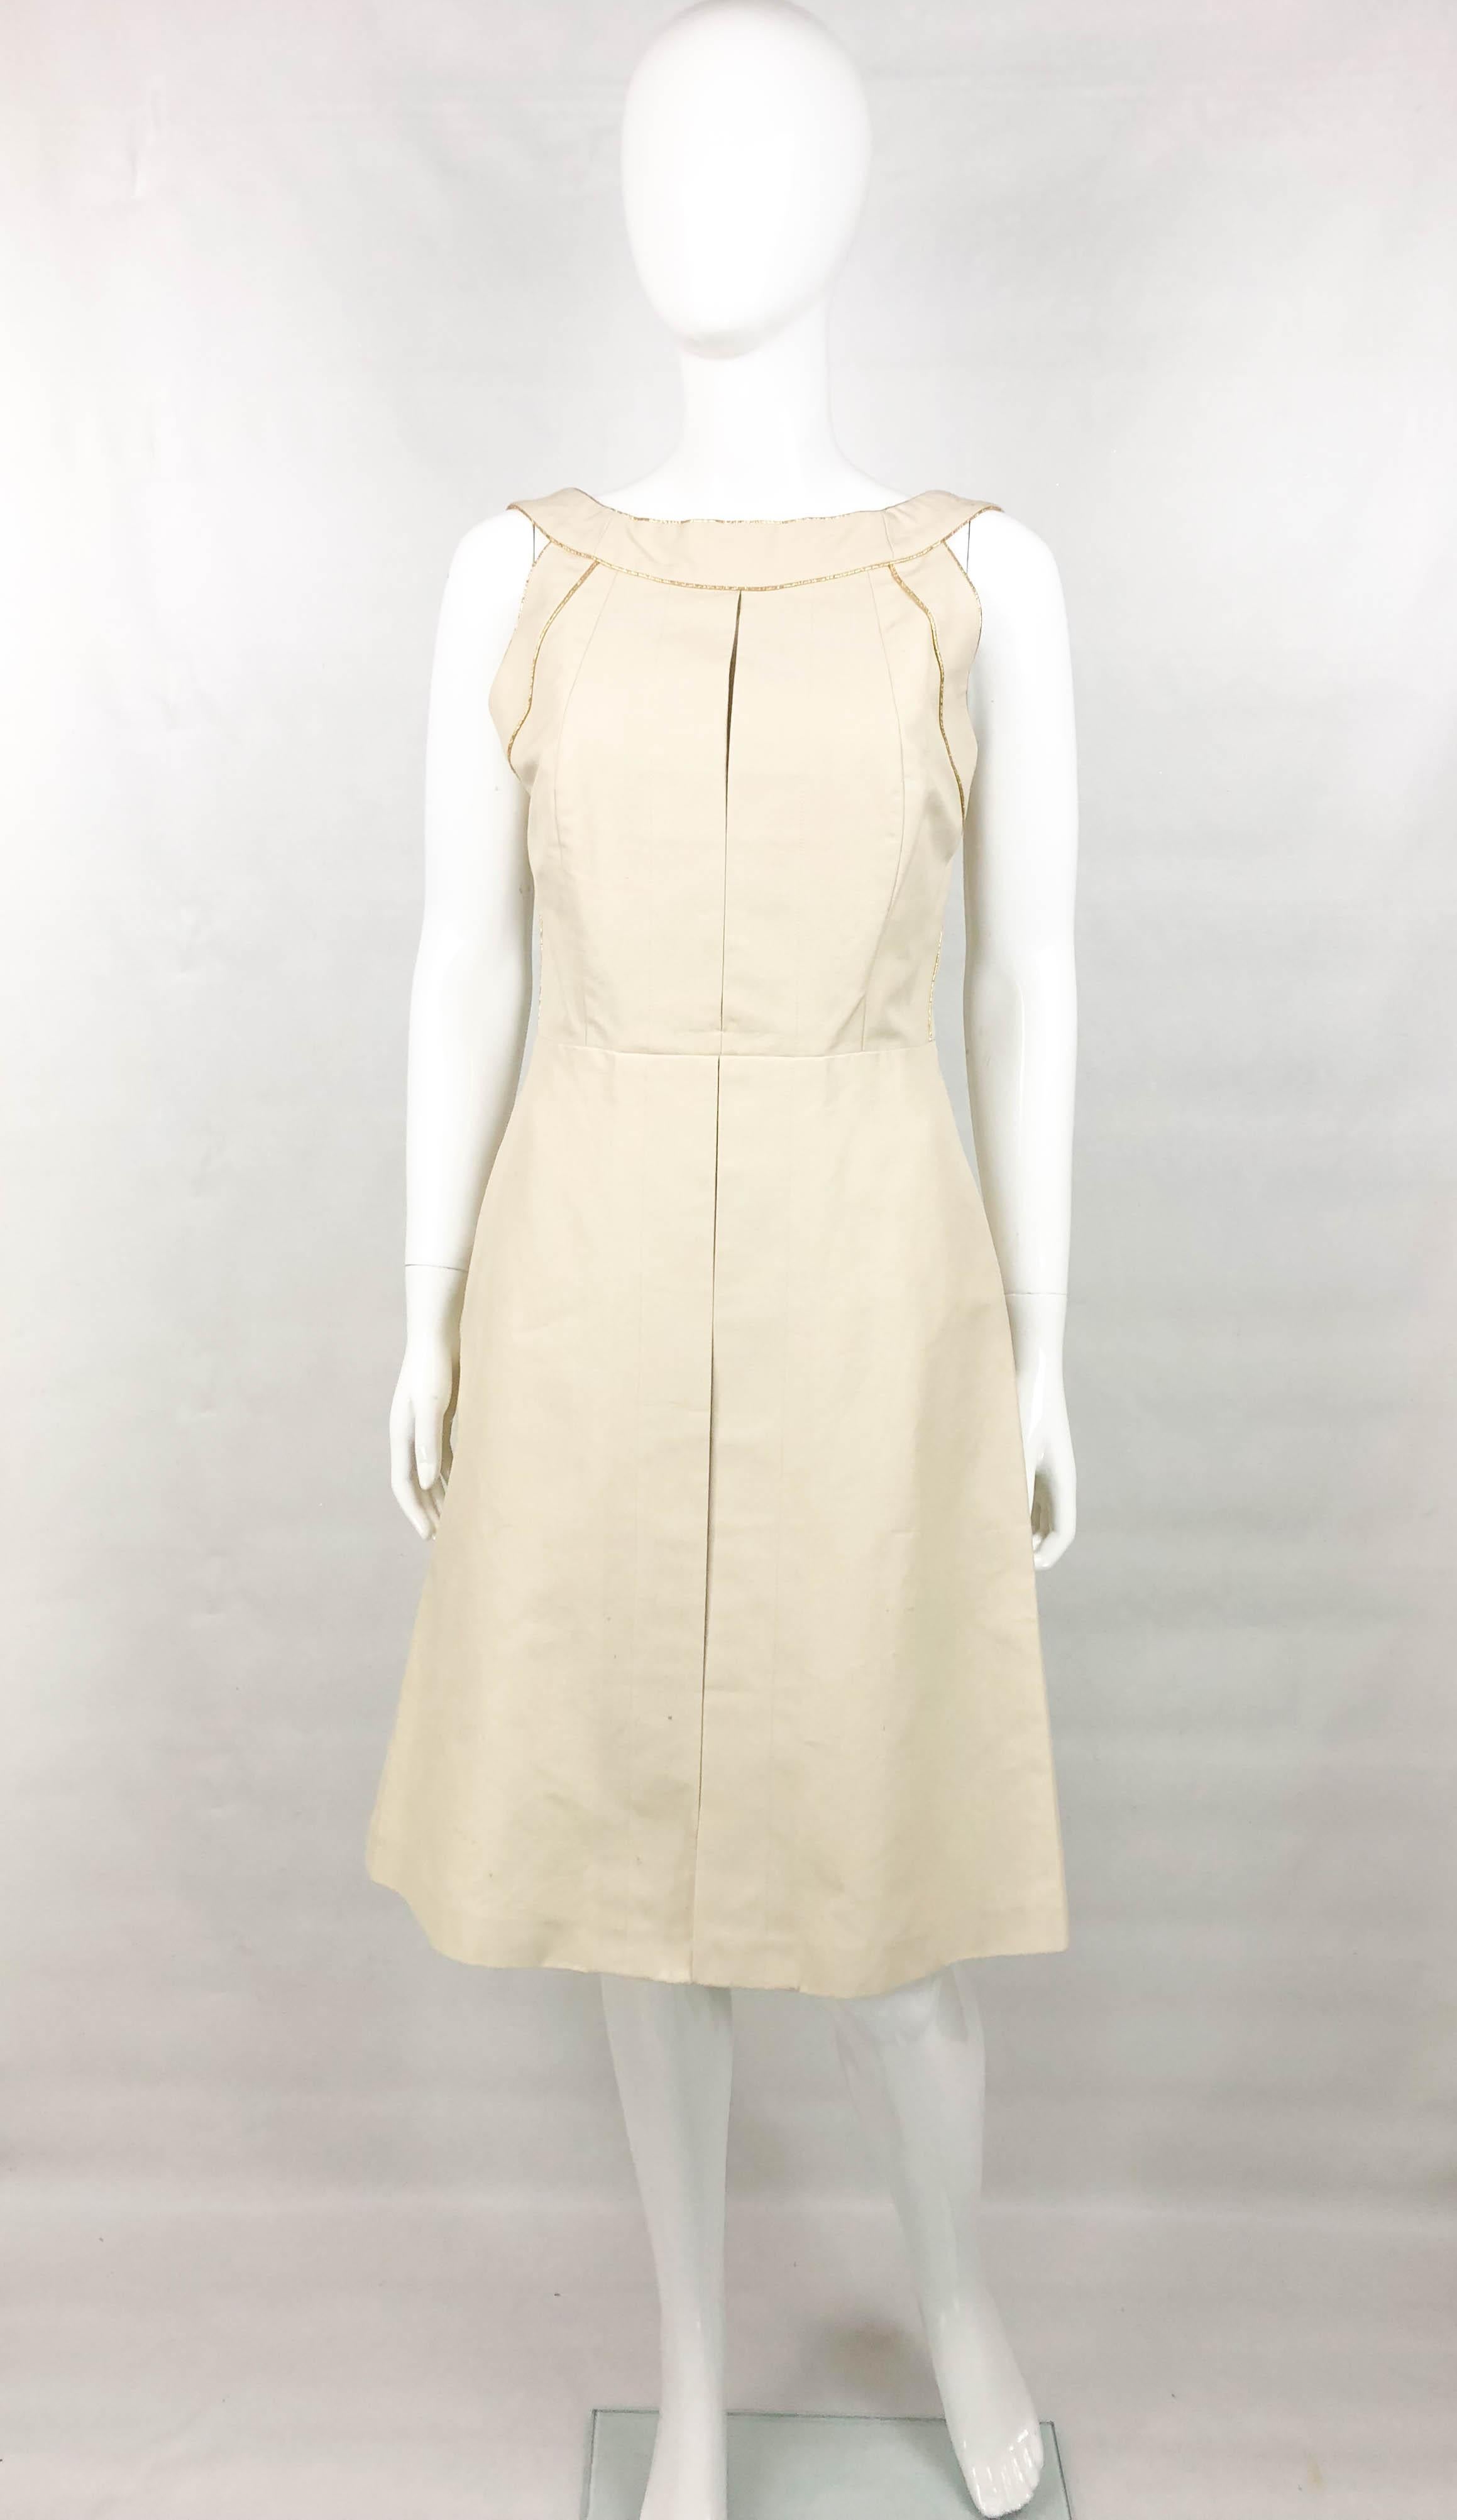 Yves Saint Laurent Cream Cotton Dress With Gold Trim, 2011 In Excellent Condition For Sale In London, Chelsea